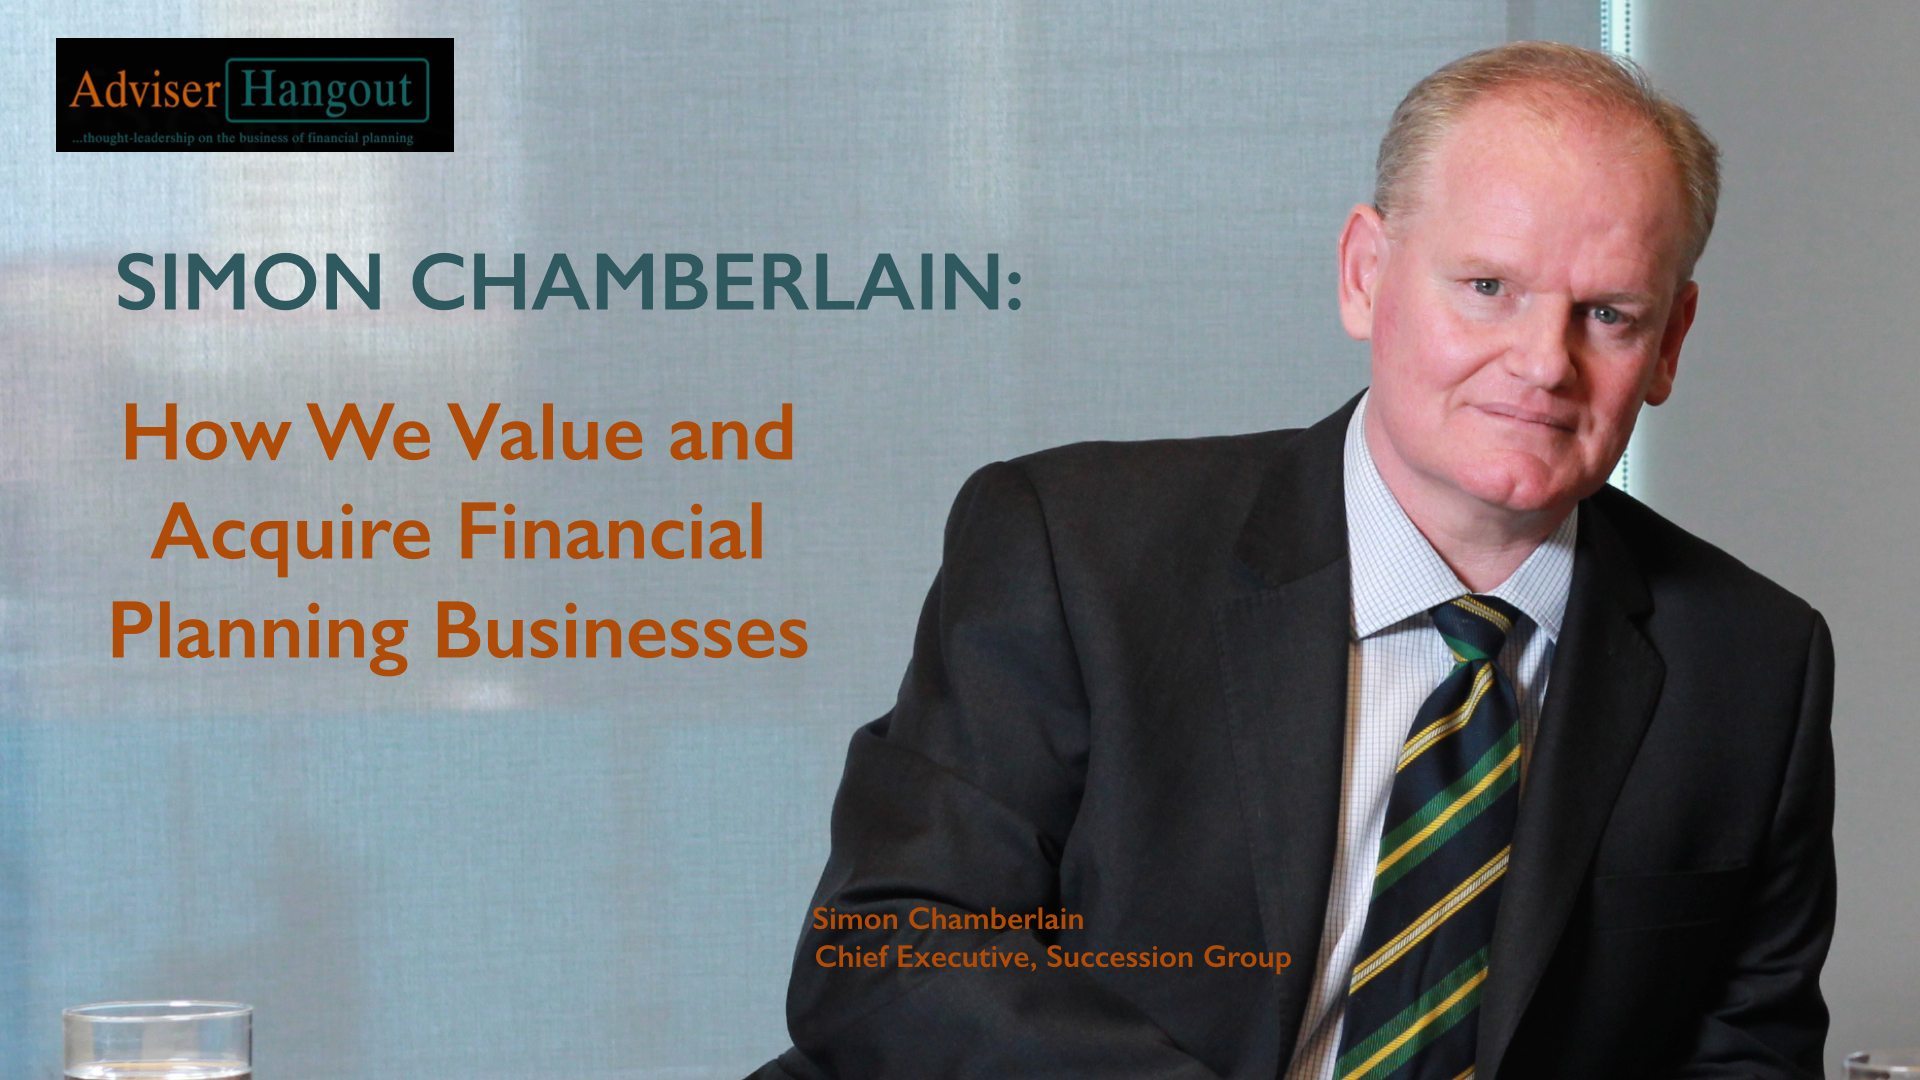 Simon Chamberlain: How We Value And Acquire Financial Planning Businesses